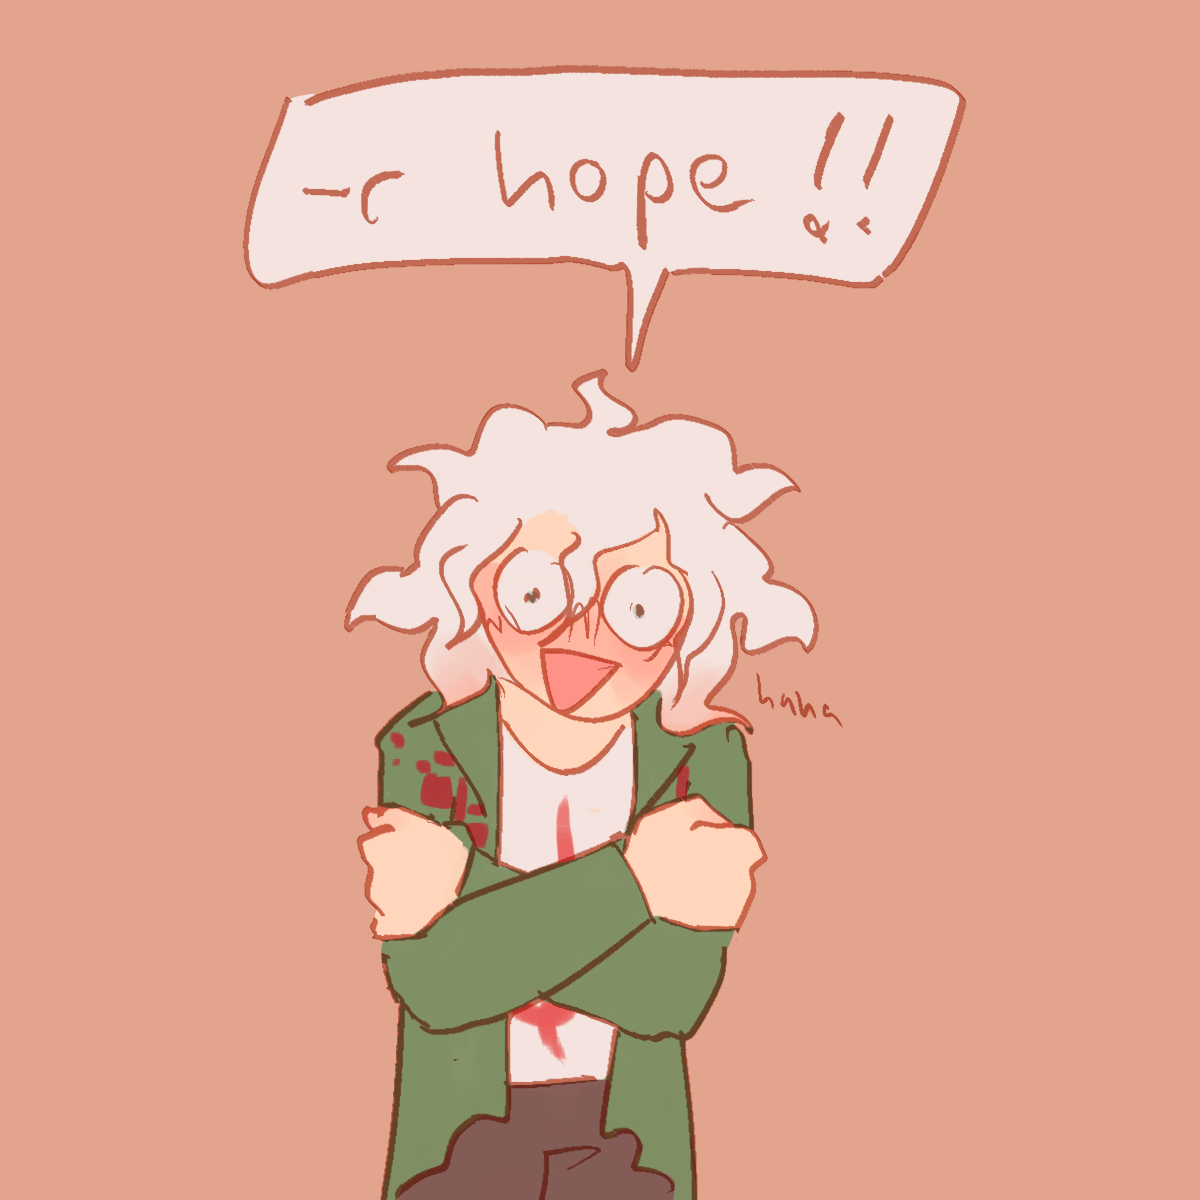 he corrects himself to '-your hope!', looking embarrassed.